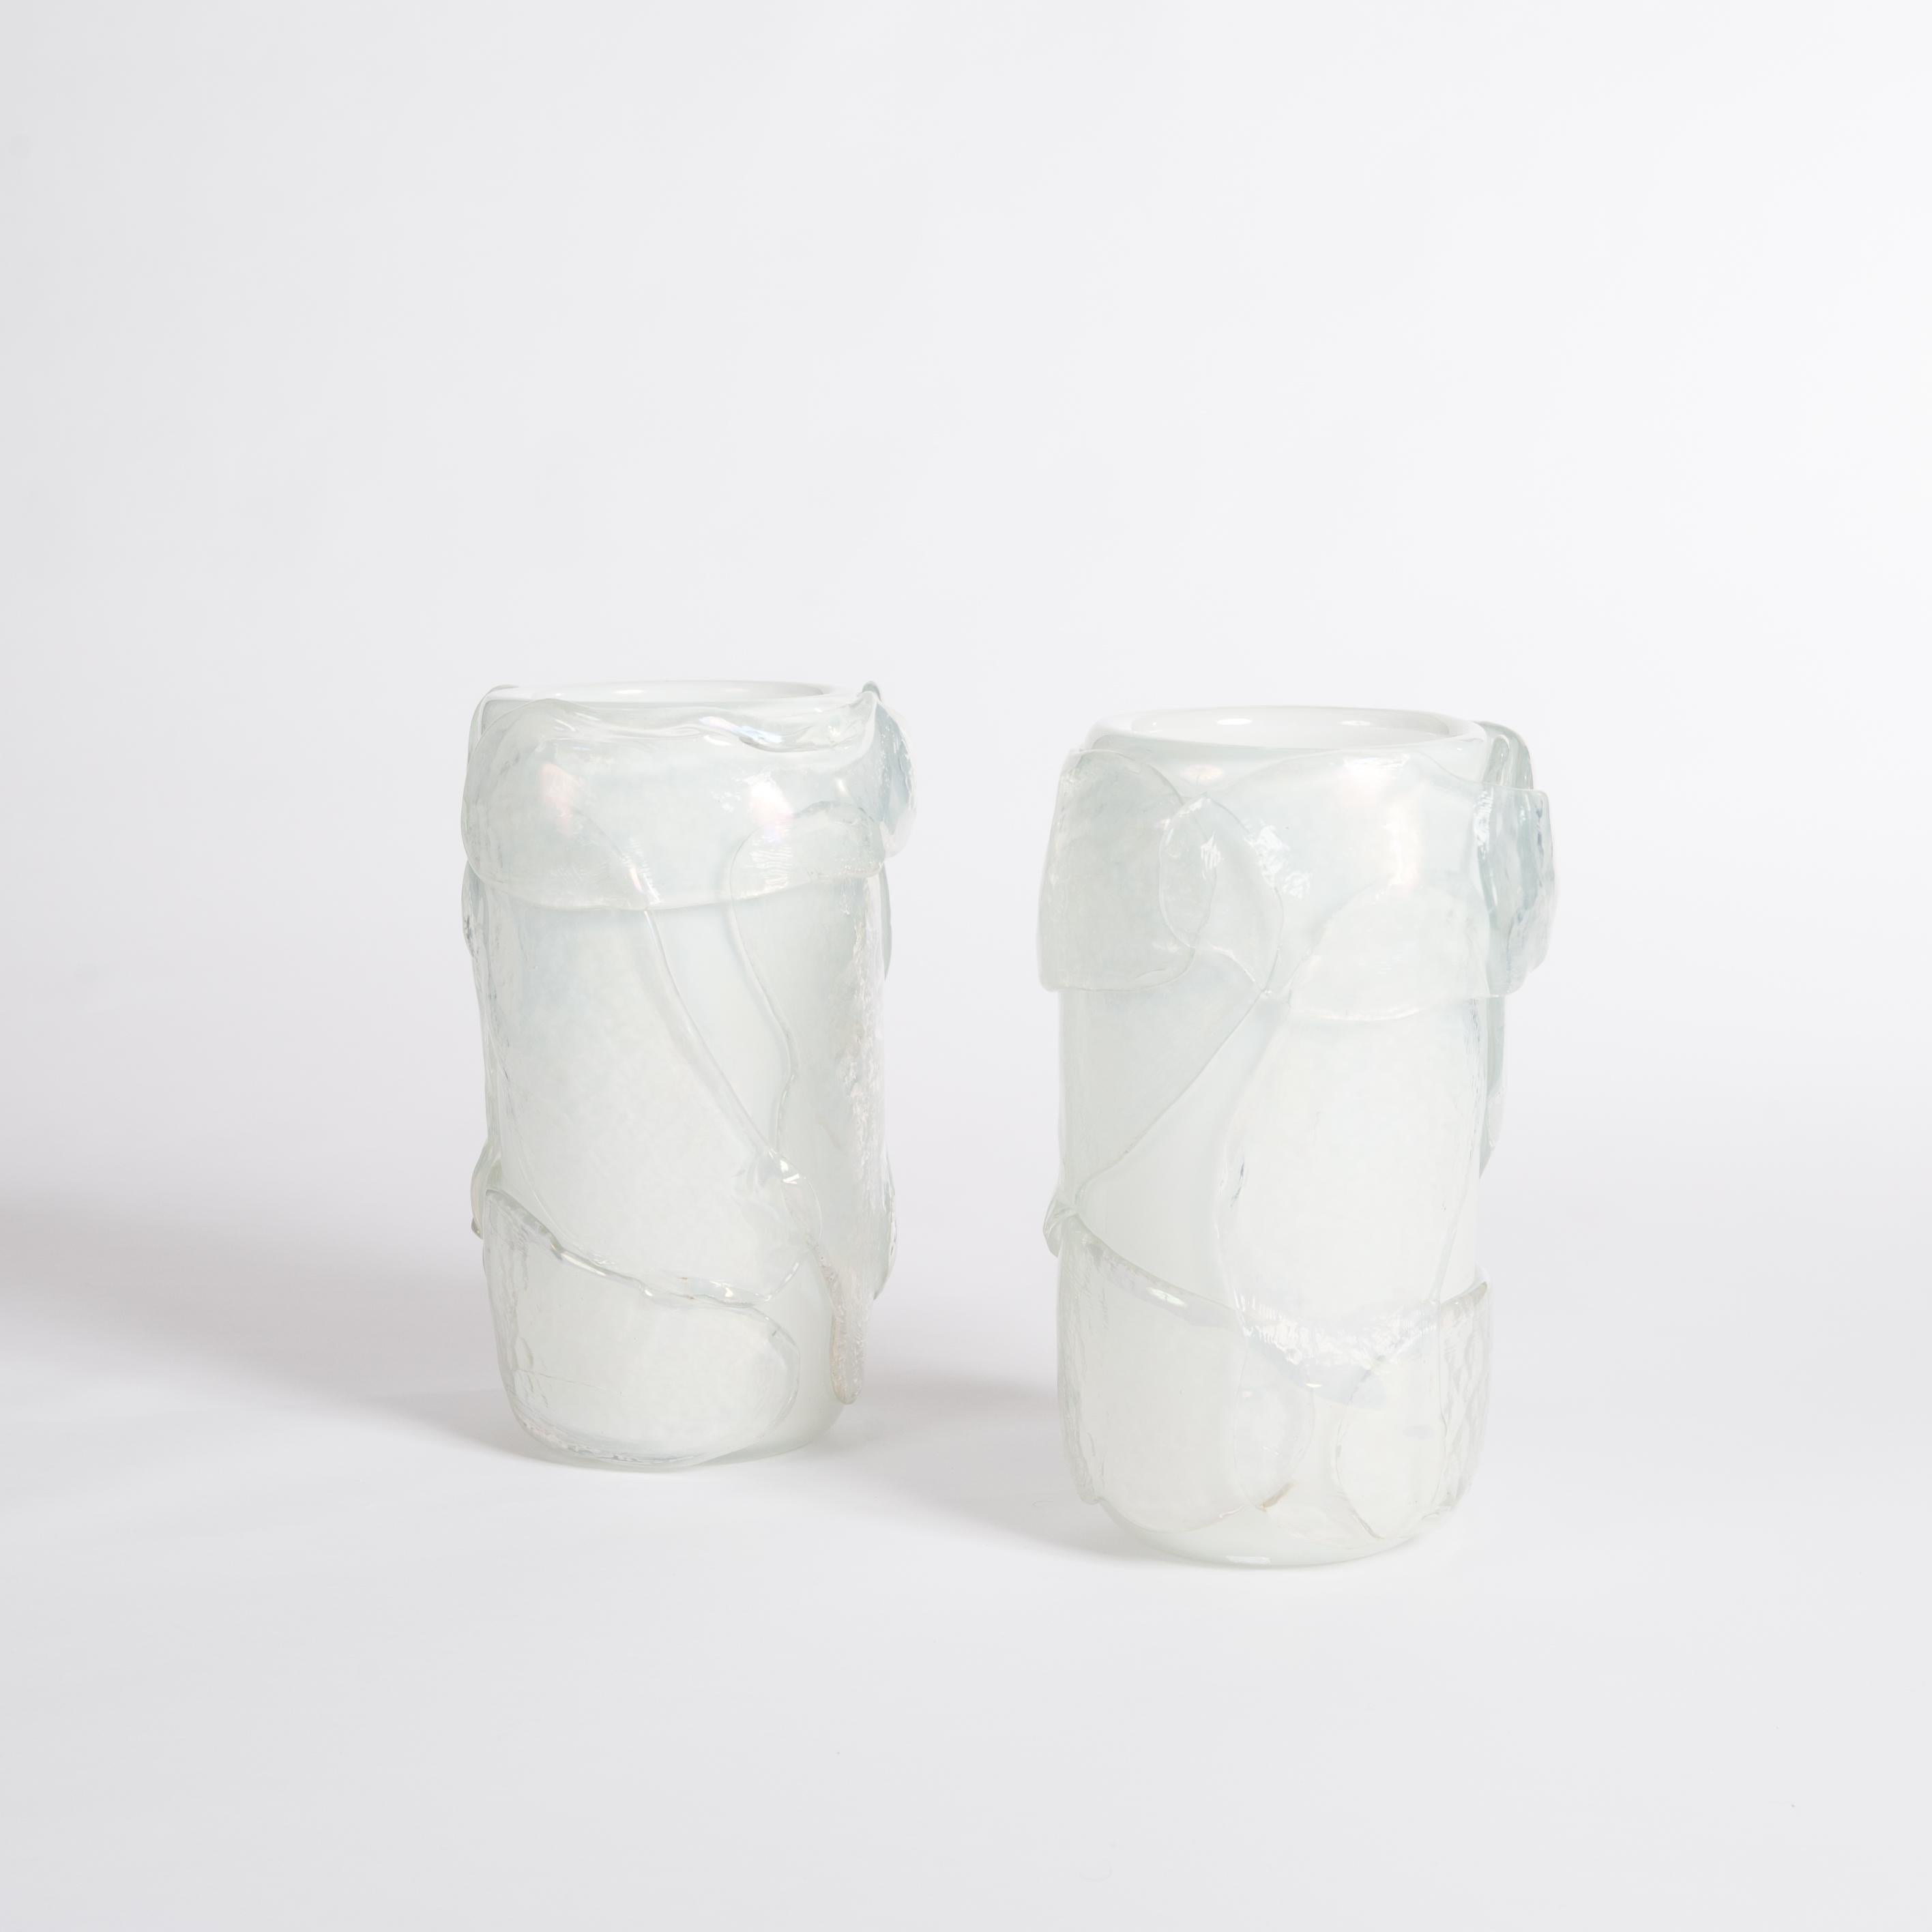 A pair of modern Italian Murano glass vases white-irisdecent colored with surreal impression.
The straight lined body out of white Murano glass shows enormous opal glass leaves outside on the surface and turns the
vase into a sculpture.
The vases